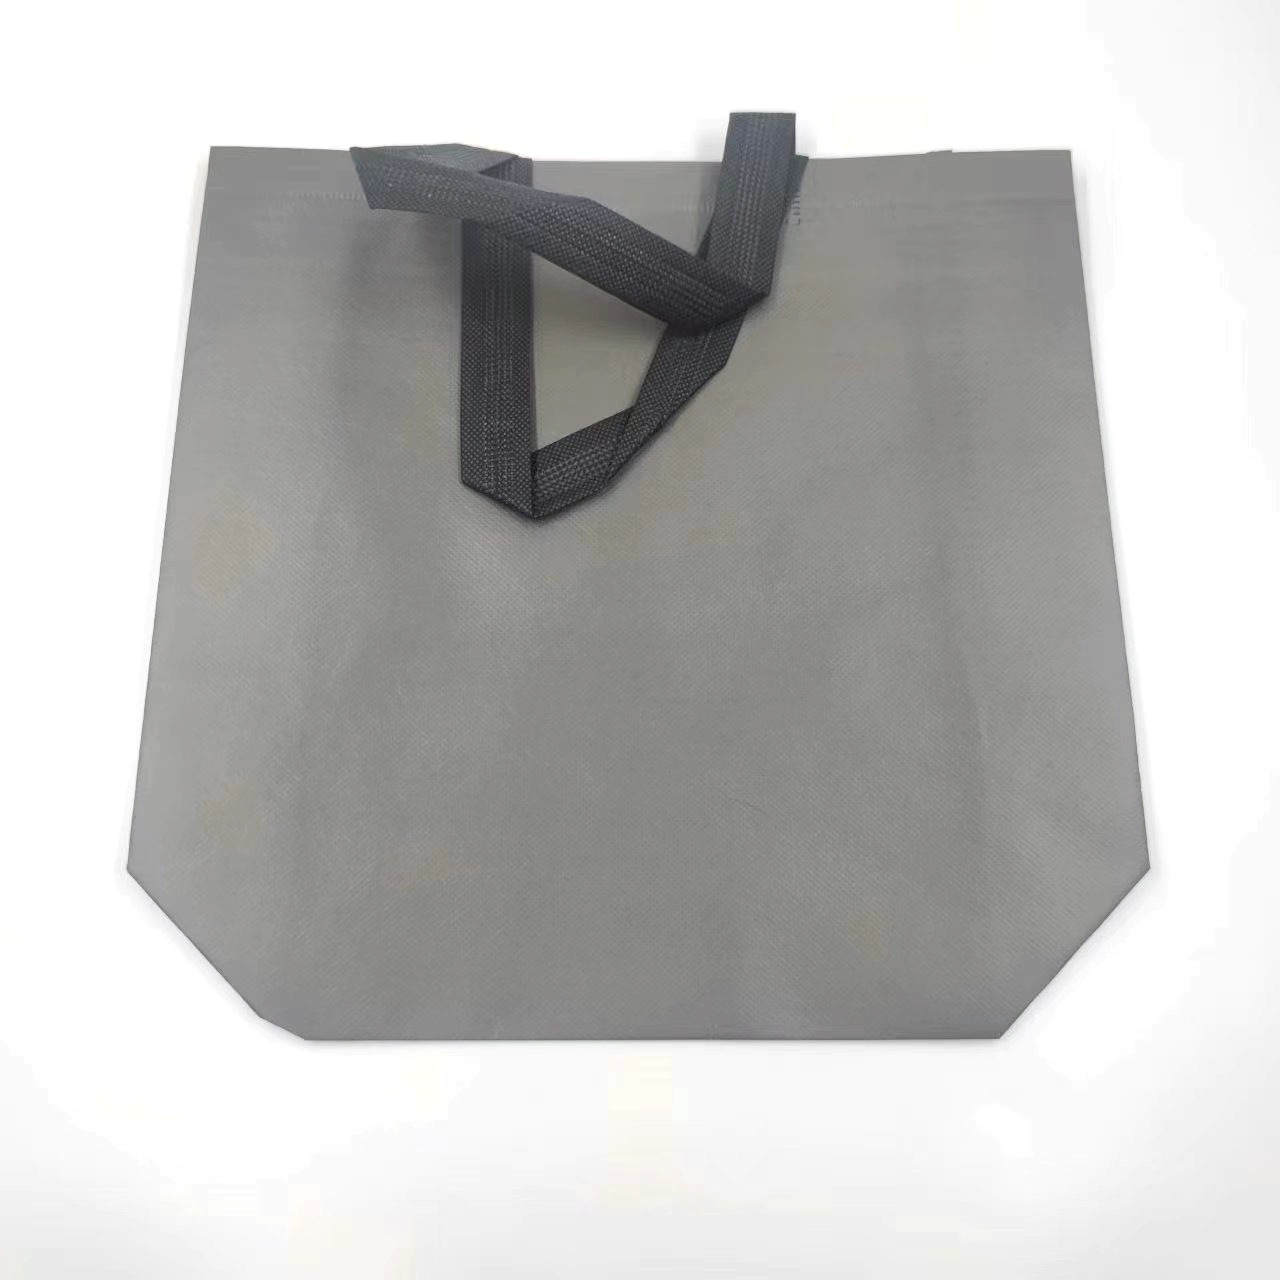 Spot Thickened Black Film Non-Woven Fabric Take out Take Away Portable Packing Bag Clothing Gift Shopping Bag